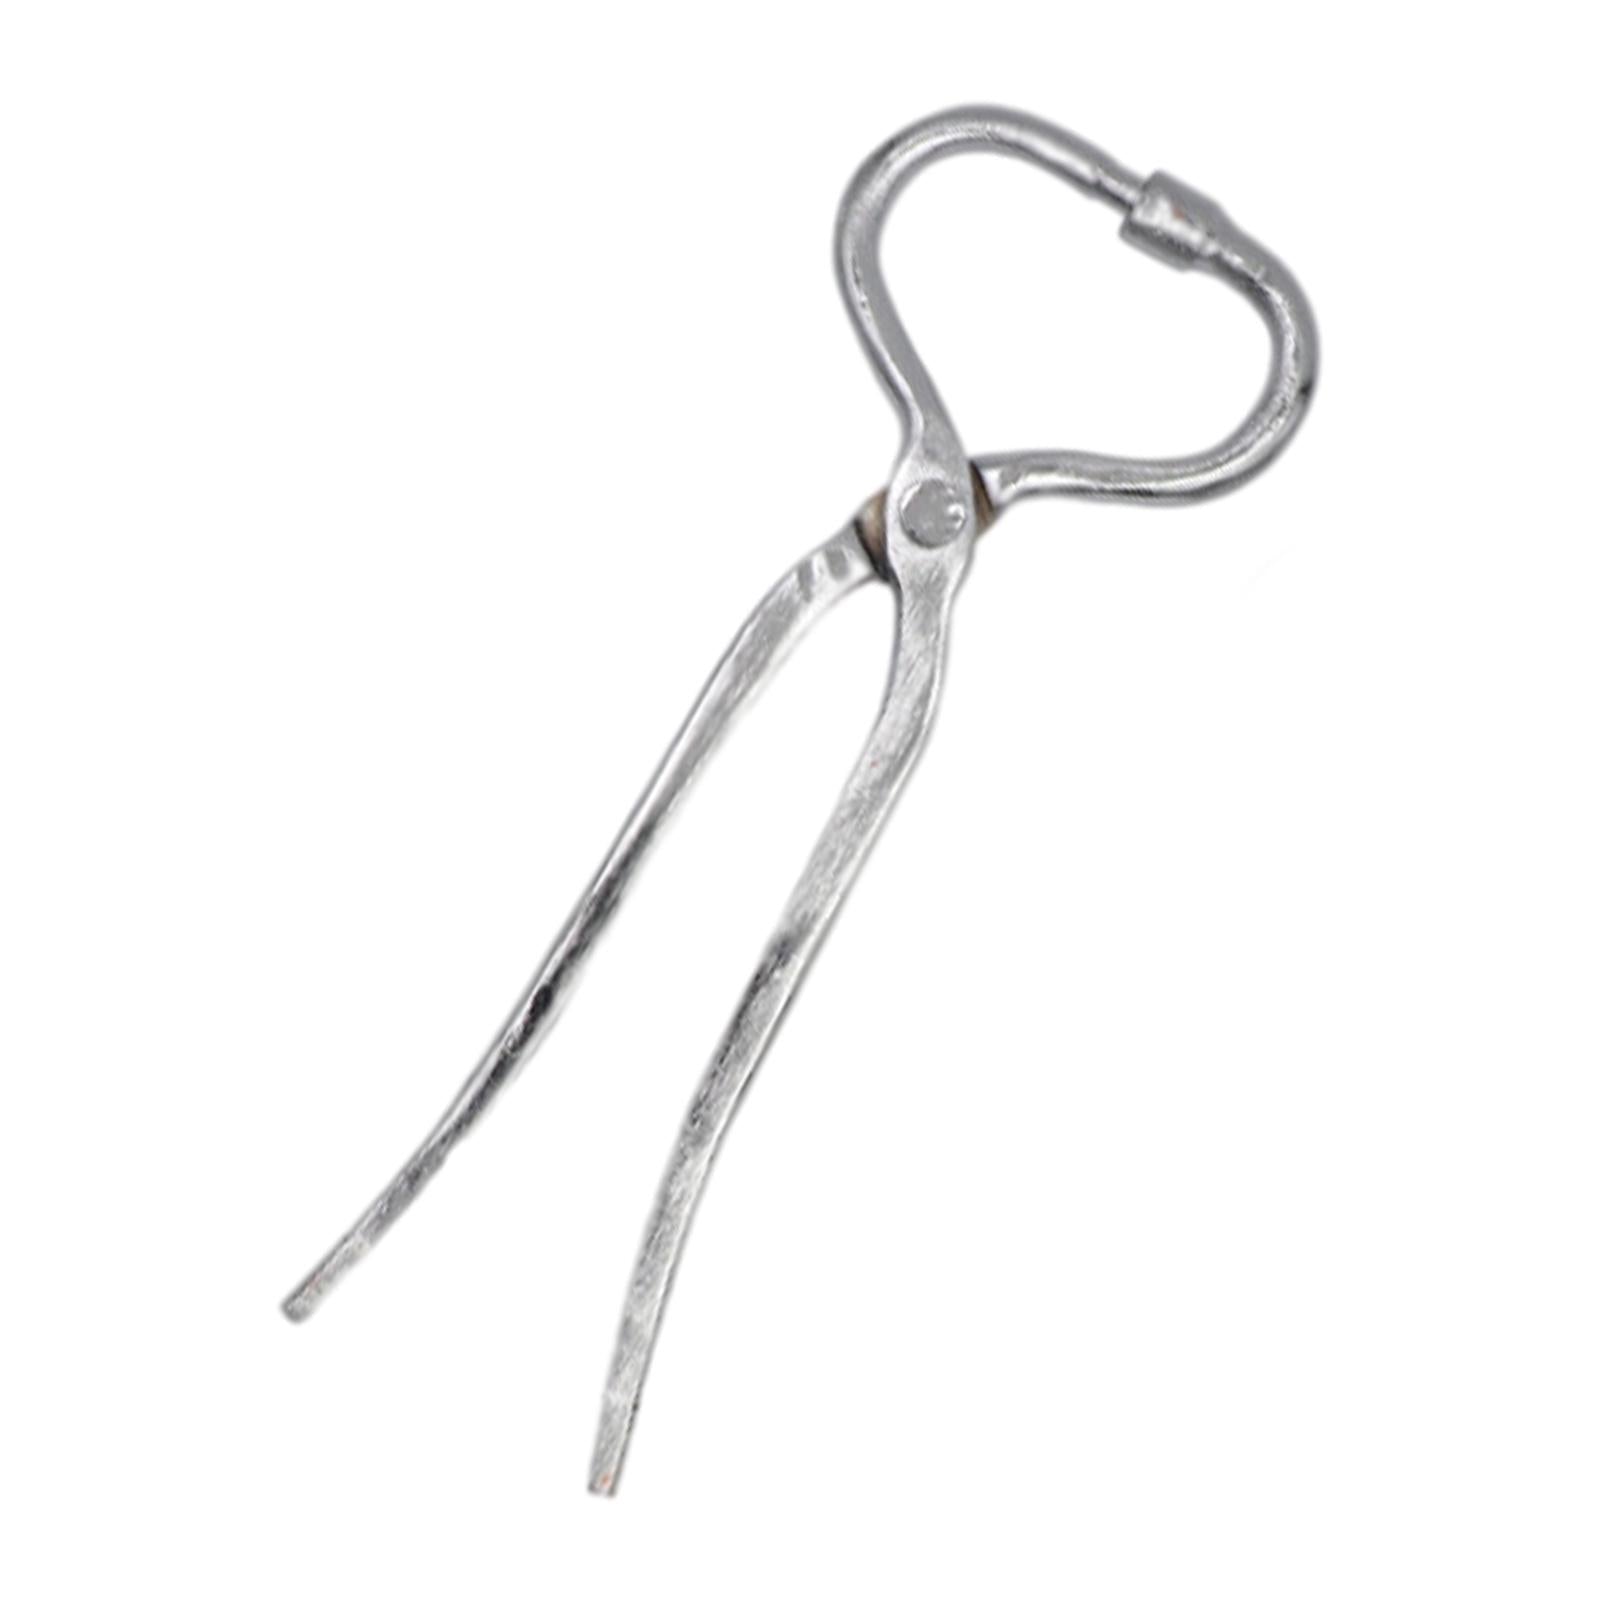 Alloy Cow Nose Pliers Drilling Tools Puncher for Farm Instrument Supplies piercing pliers